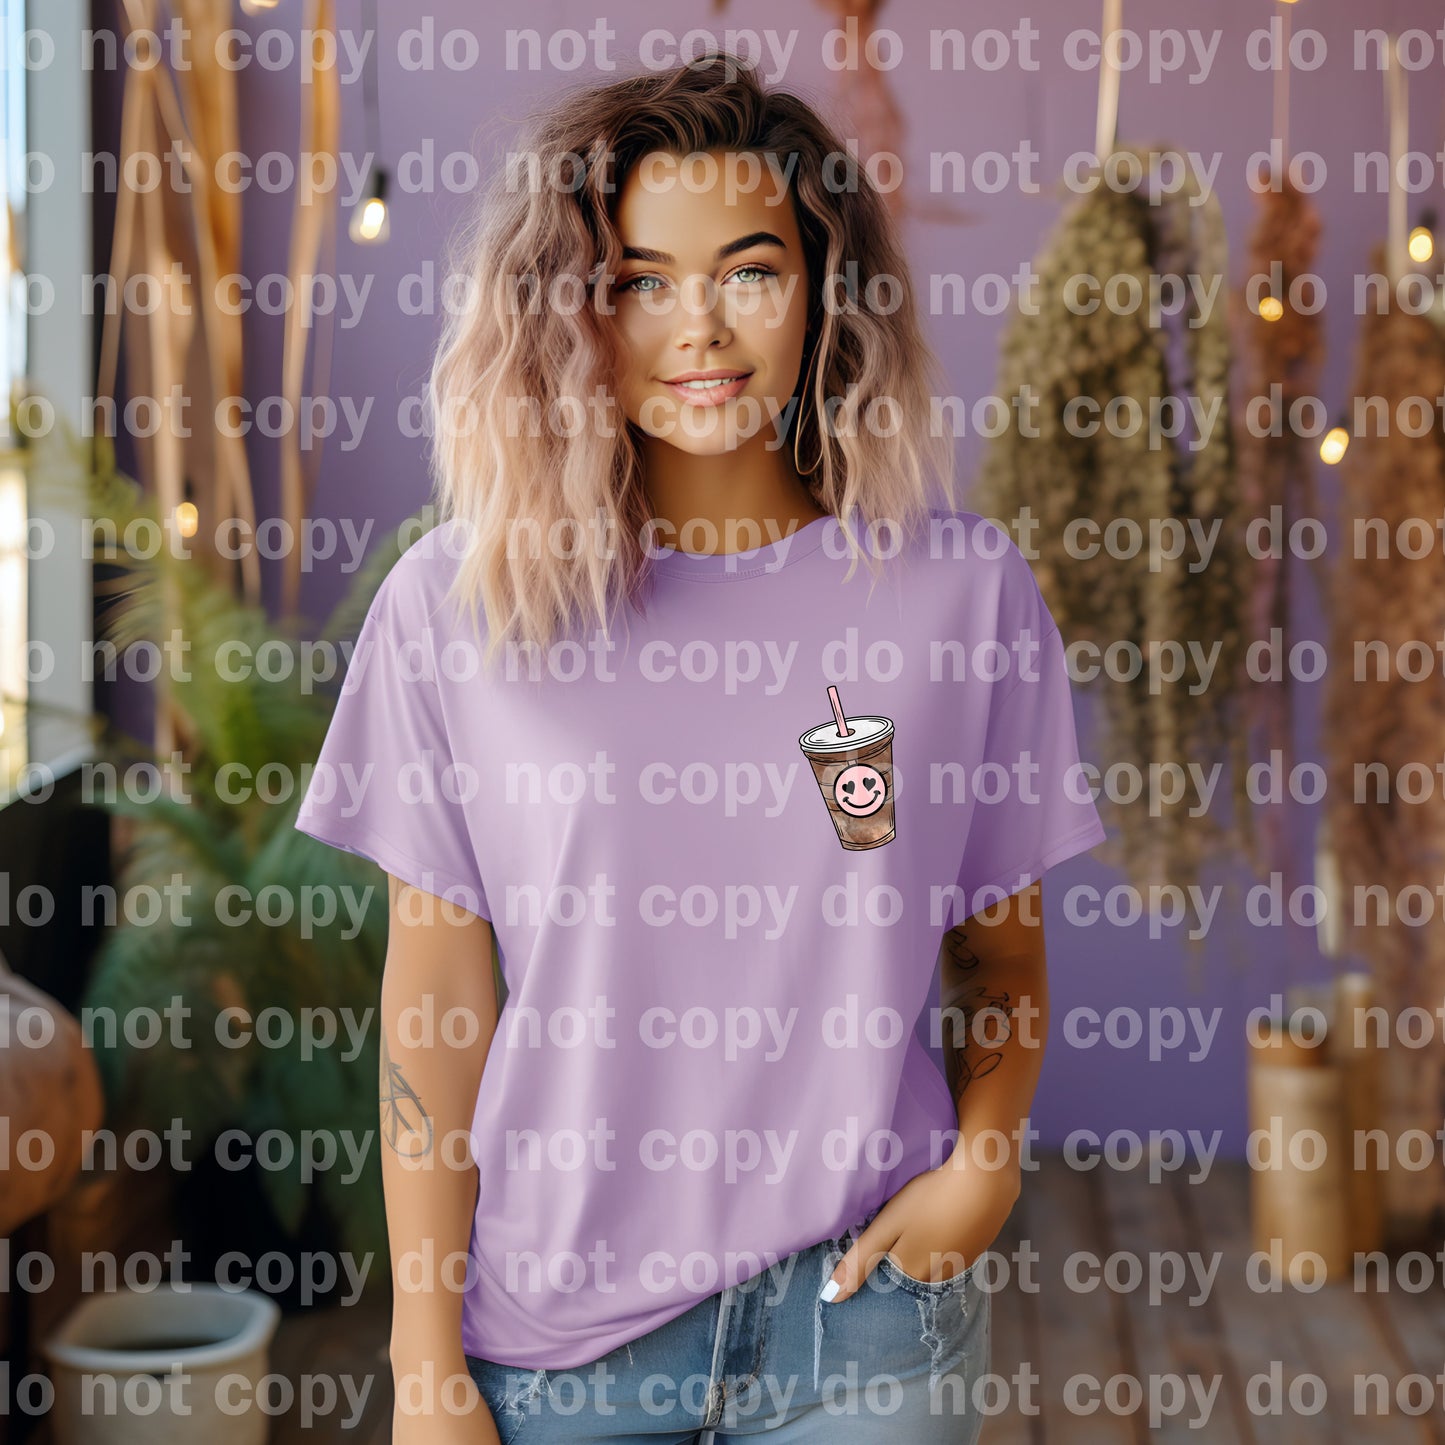 Iced Coffee Addict with Pocket Option Dream Print or Sublimation Print